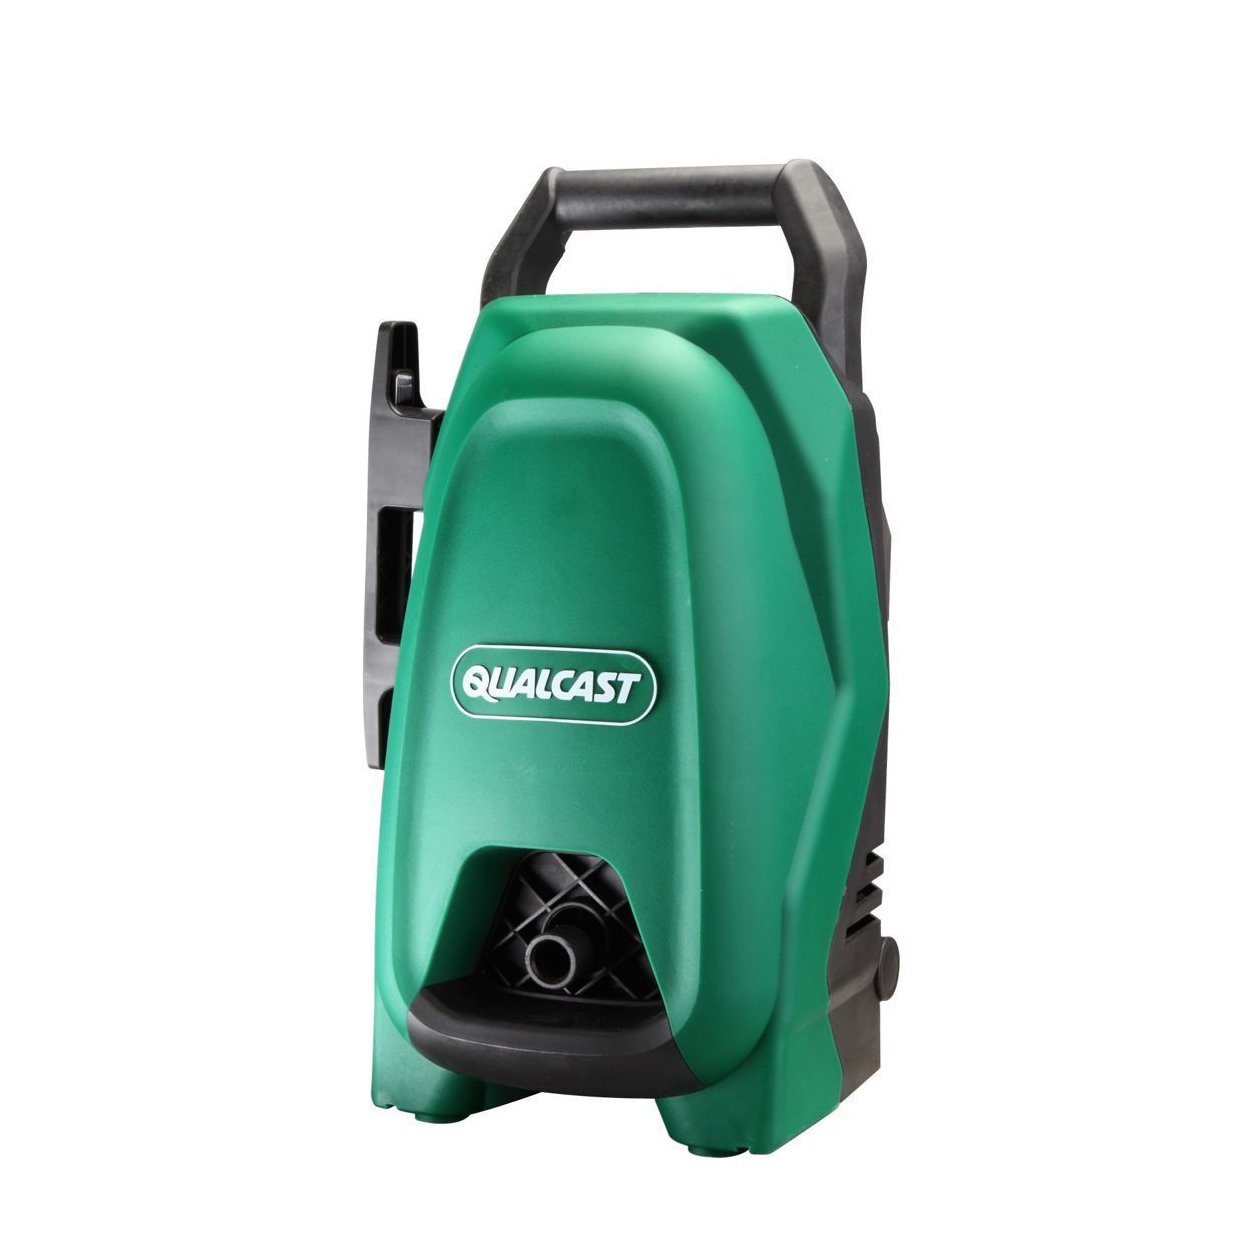 Qualcast 1400W 1800W 2000W Power Washer Spinning Dirtblaster Replacement Lance 